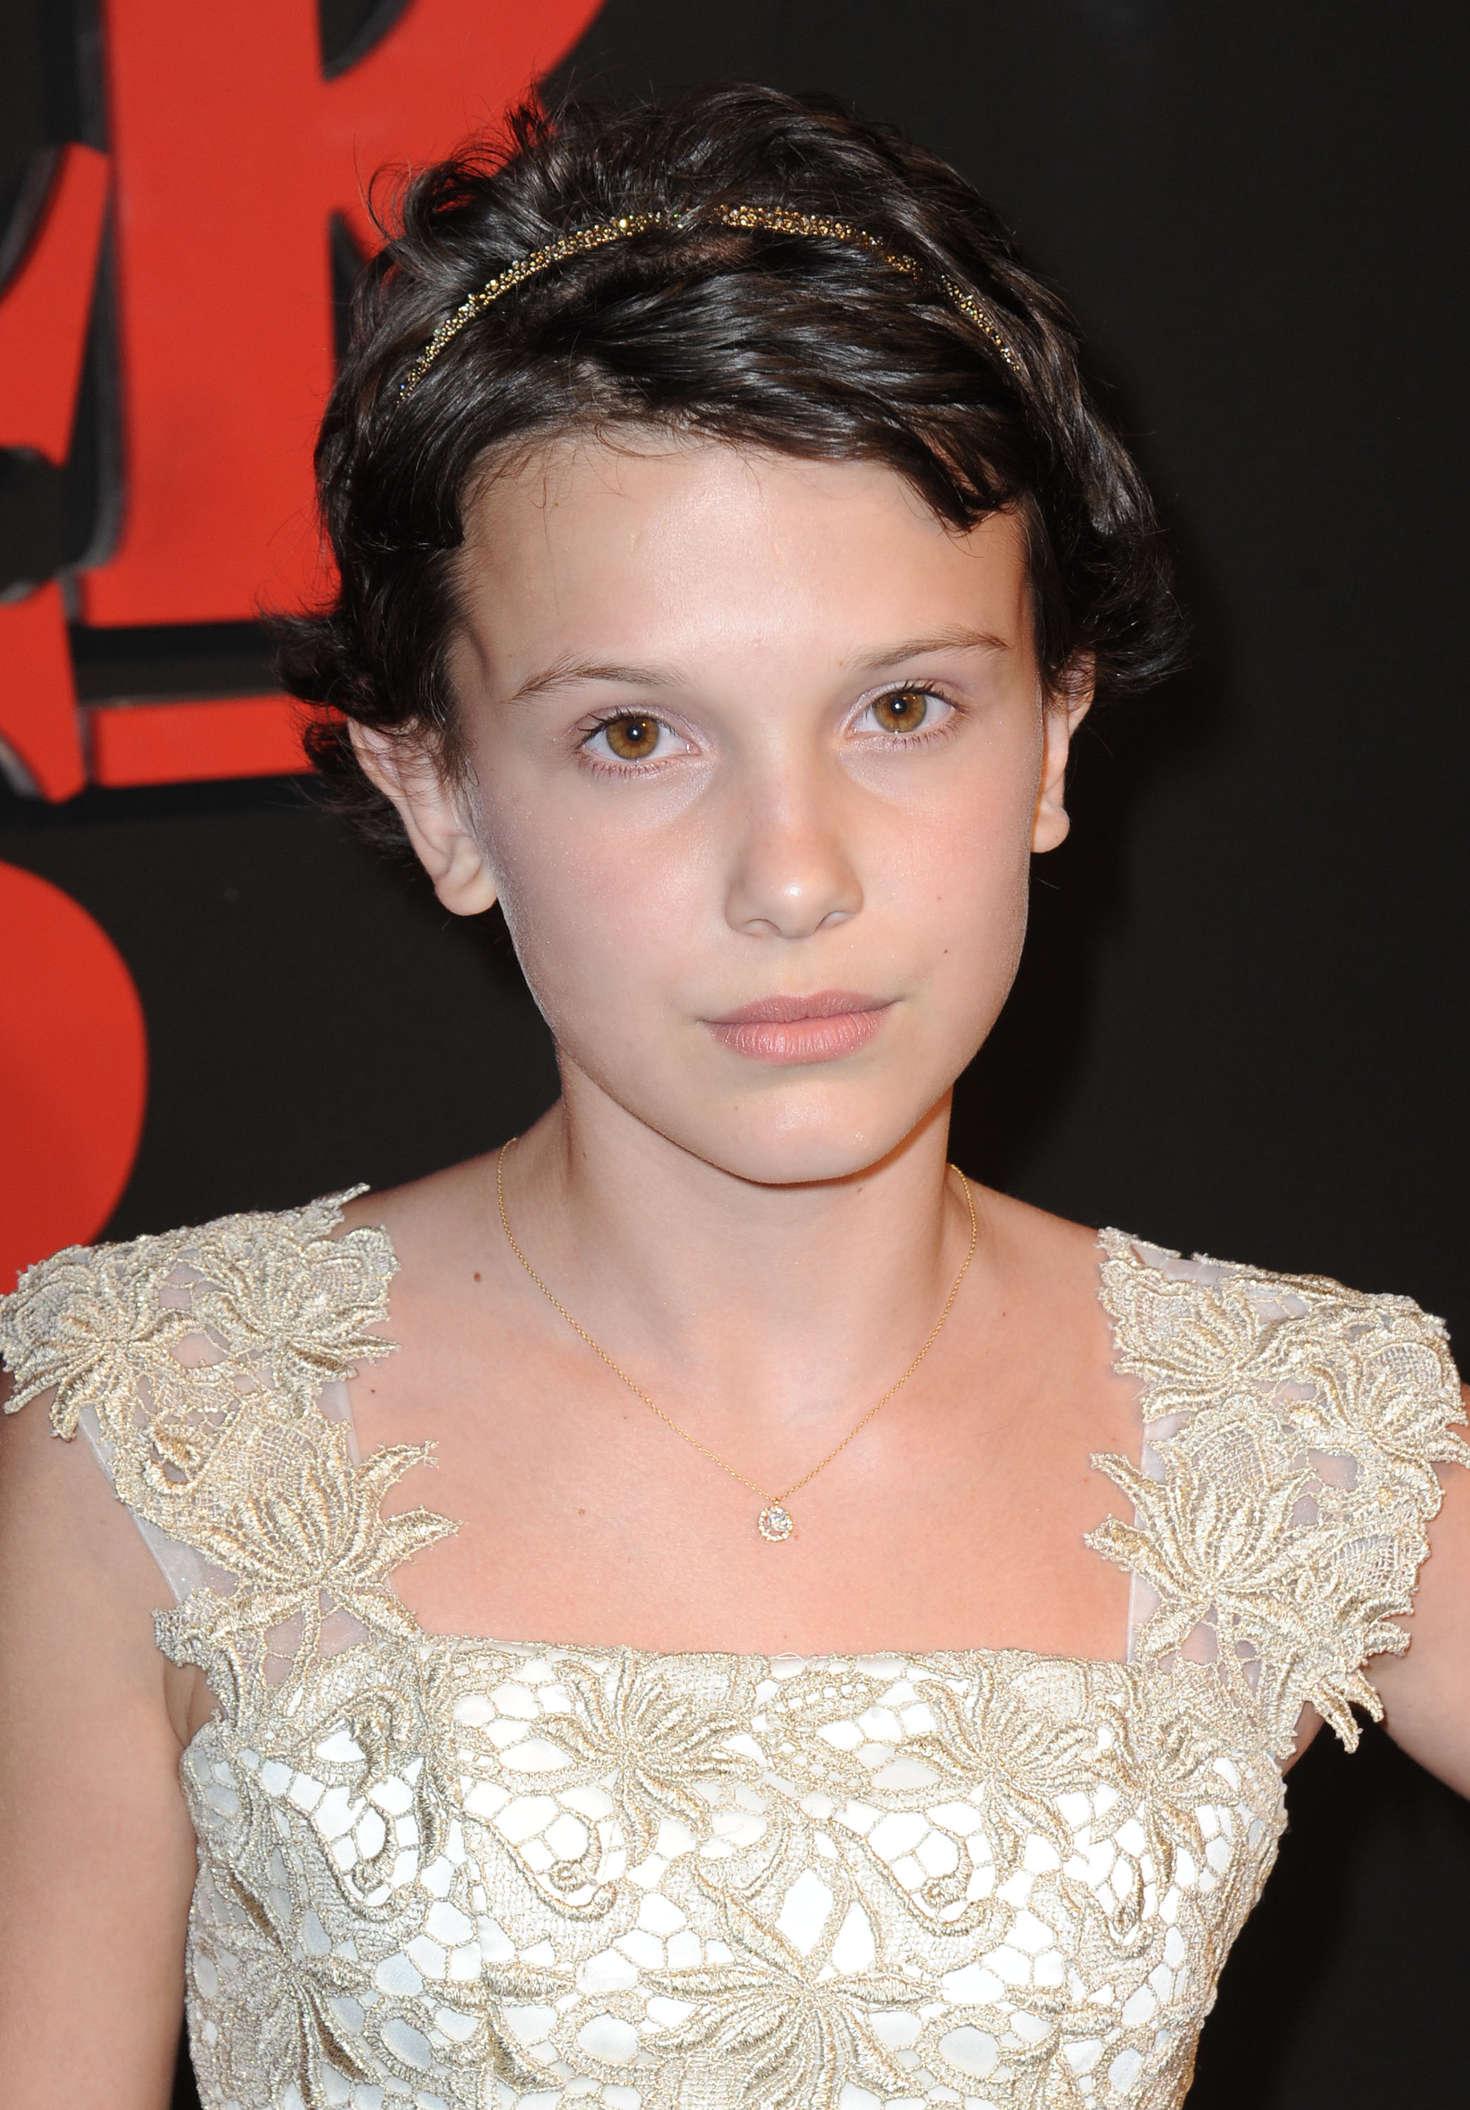 Millie Bobby Brown Wallpapers - Wallpaper Cave